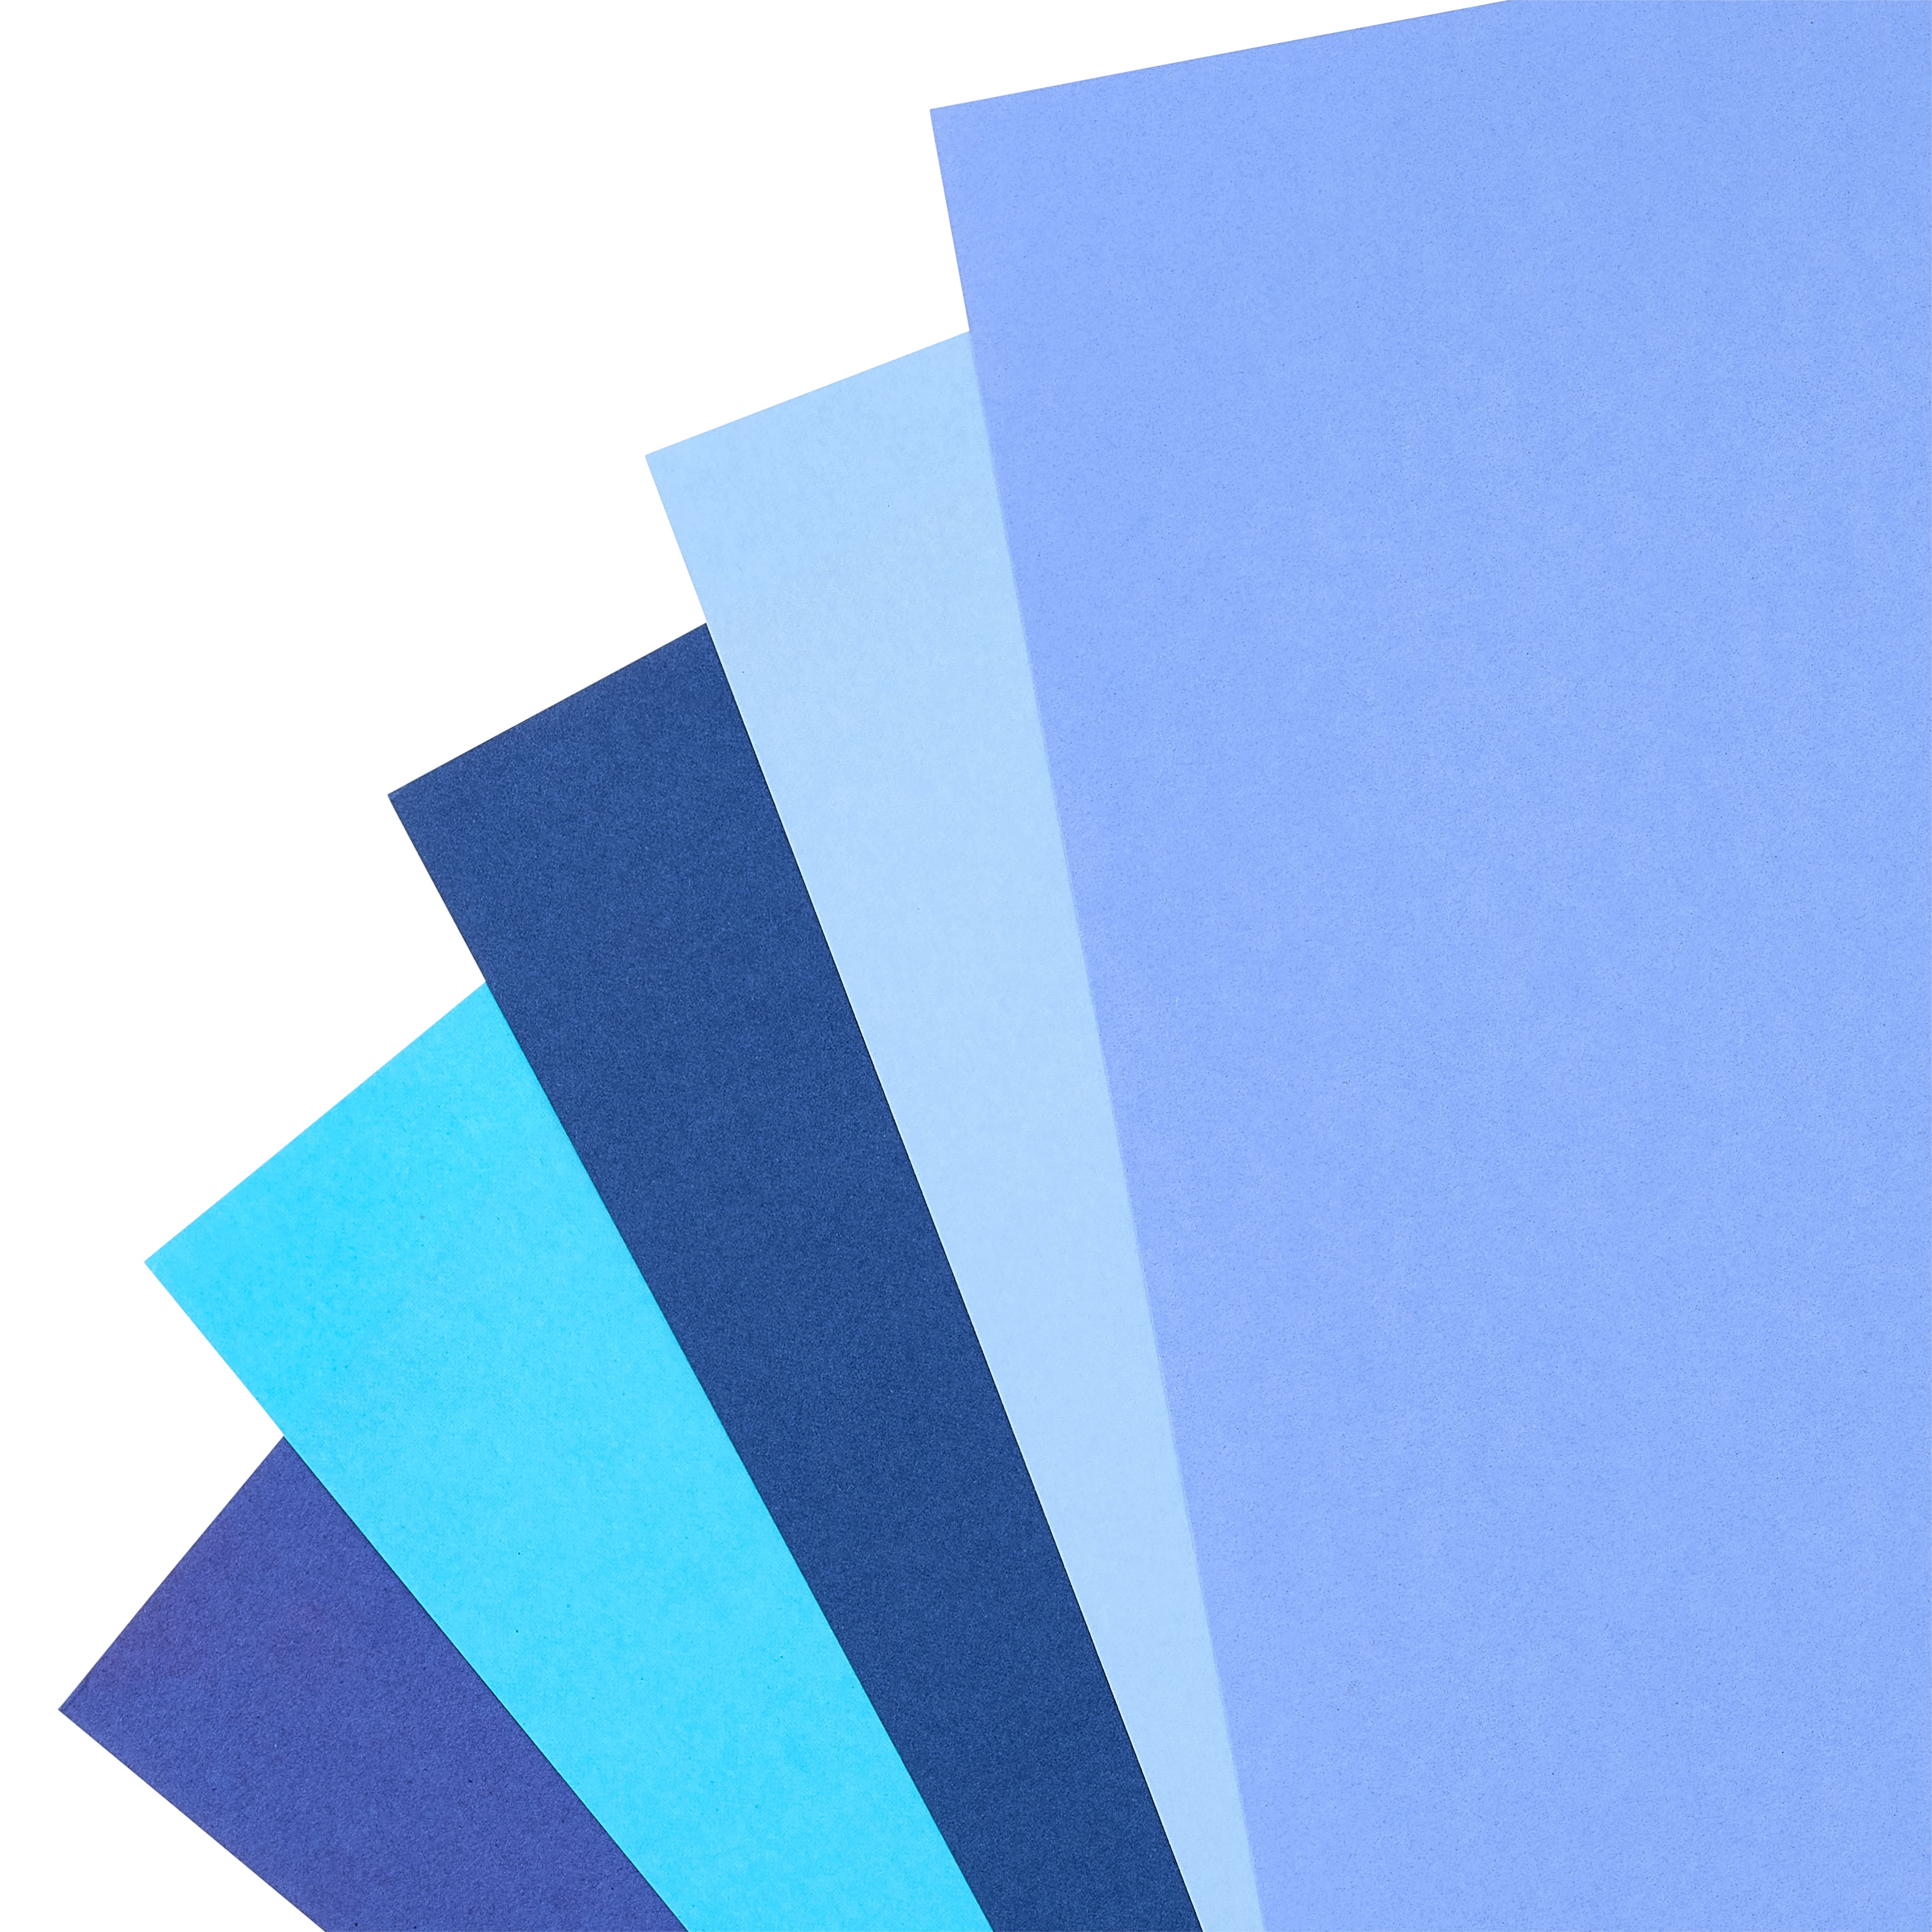 Recollections Cardstock Paper, 8 1/2 x 11 Cape Cod Blues - 50 Sheets